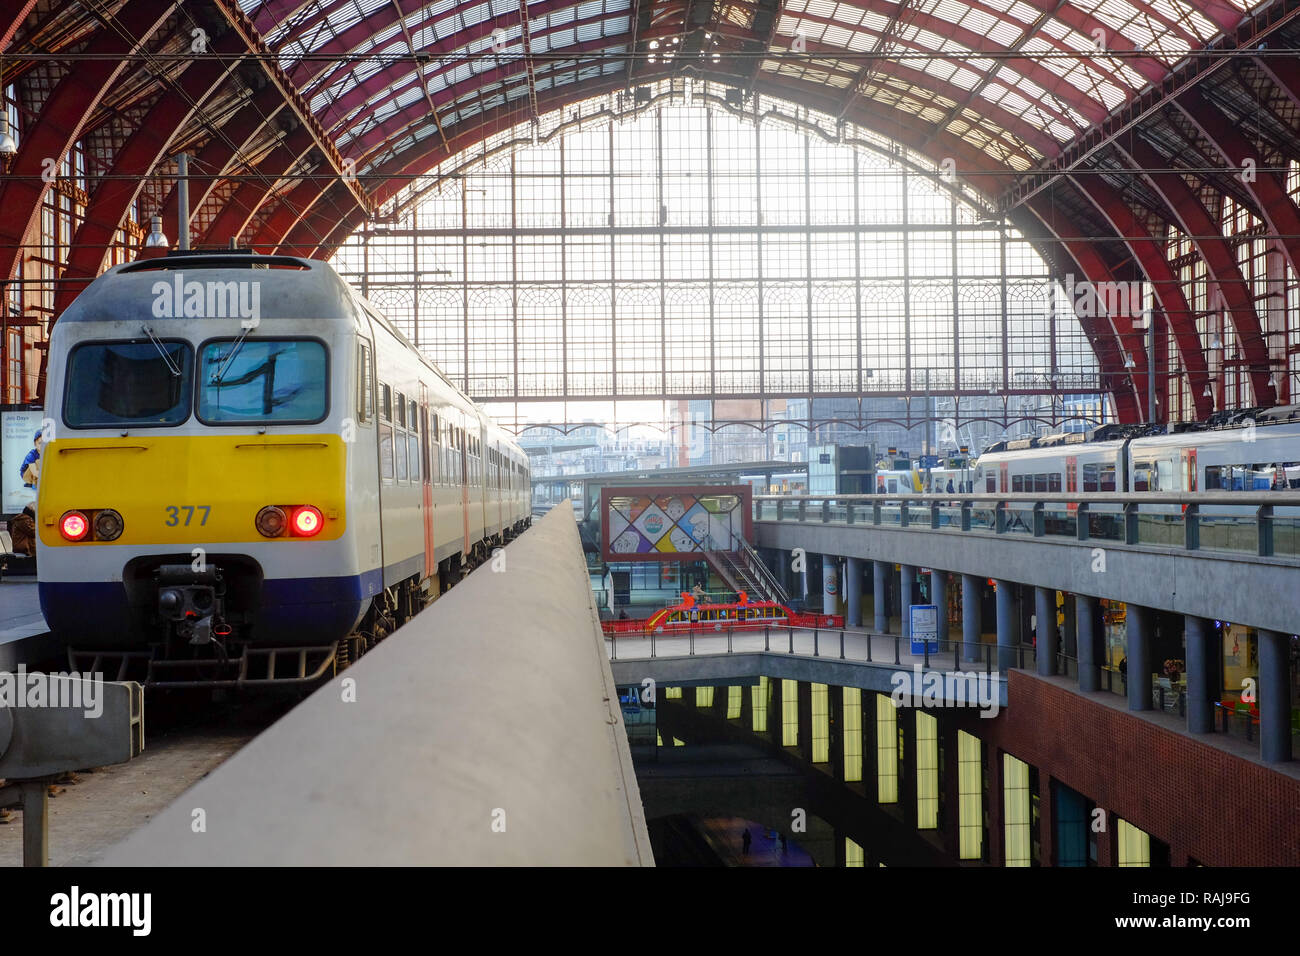 Antwerp, Belgium - Anno 2018: The train is waiting at the platform for passengers Inside the beautiful, historic and monumental Antwerp Train Station. Stock Photo